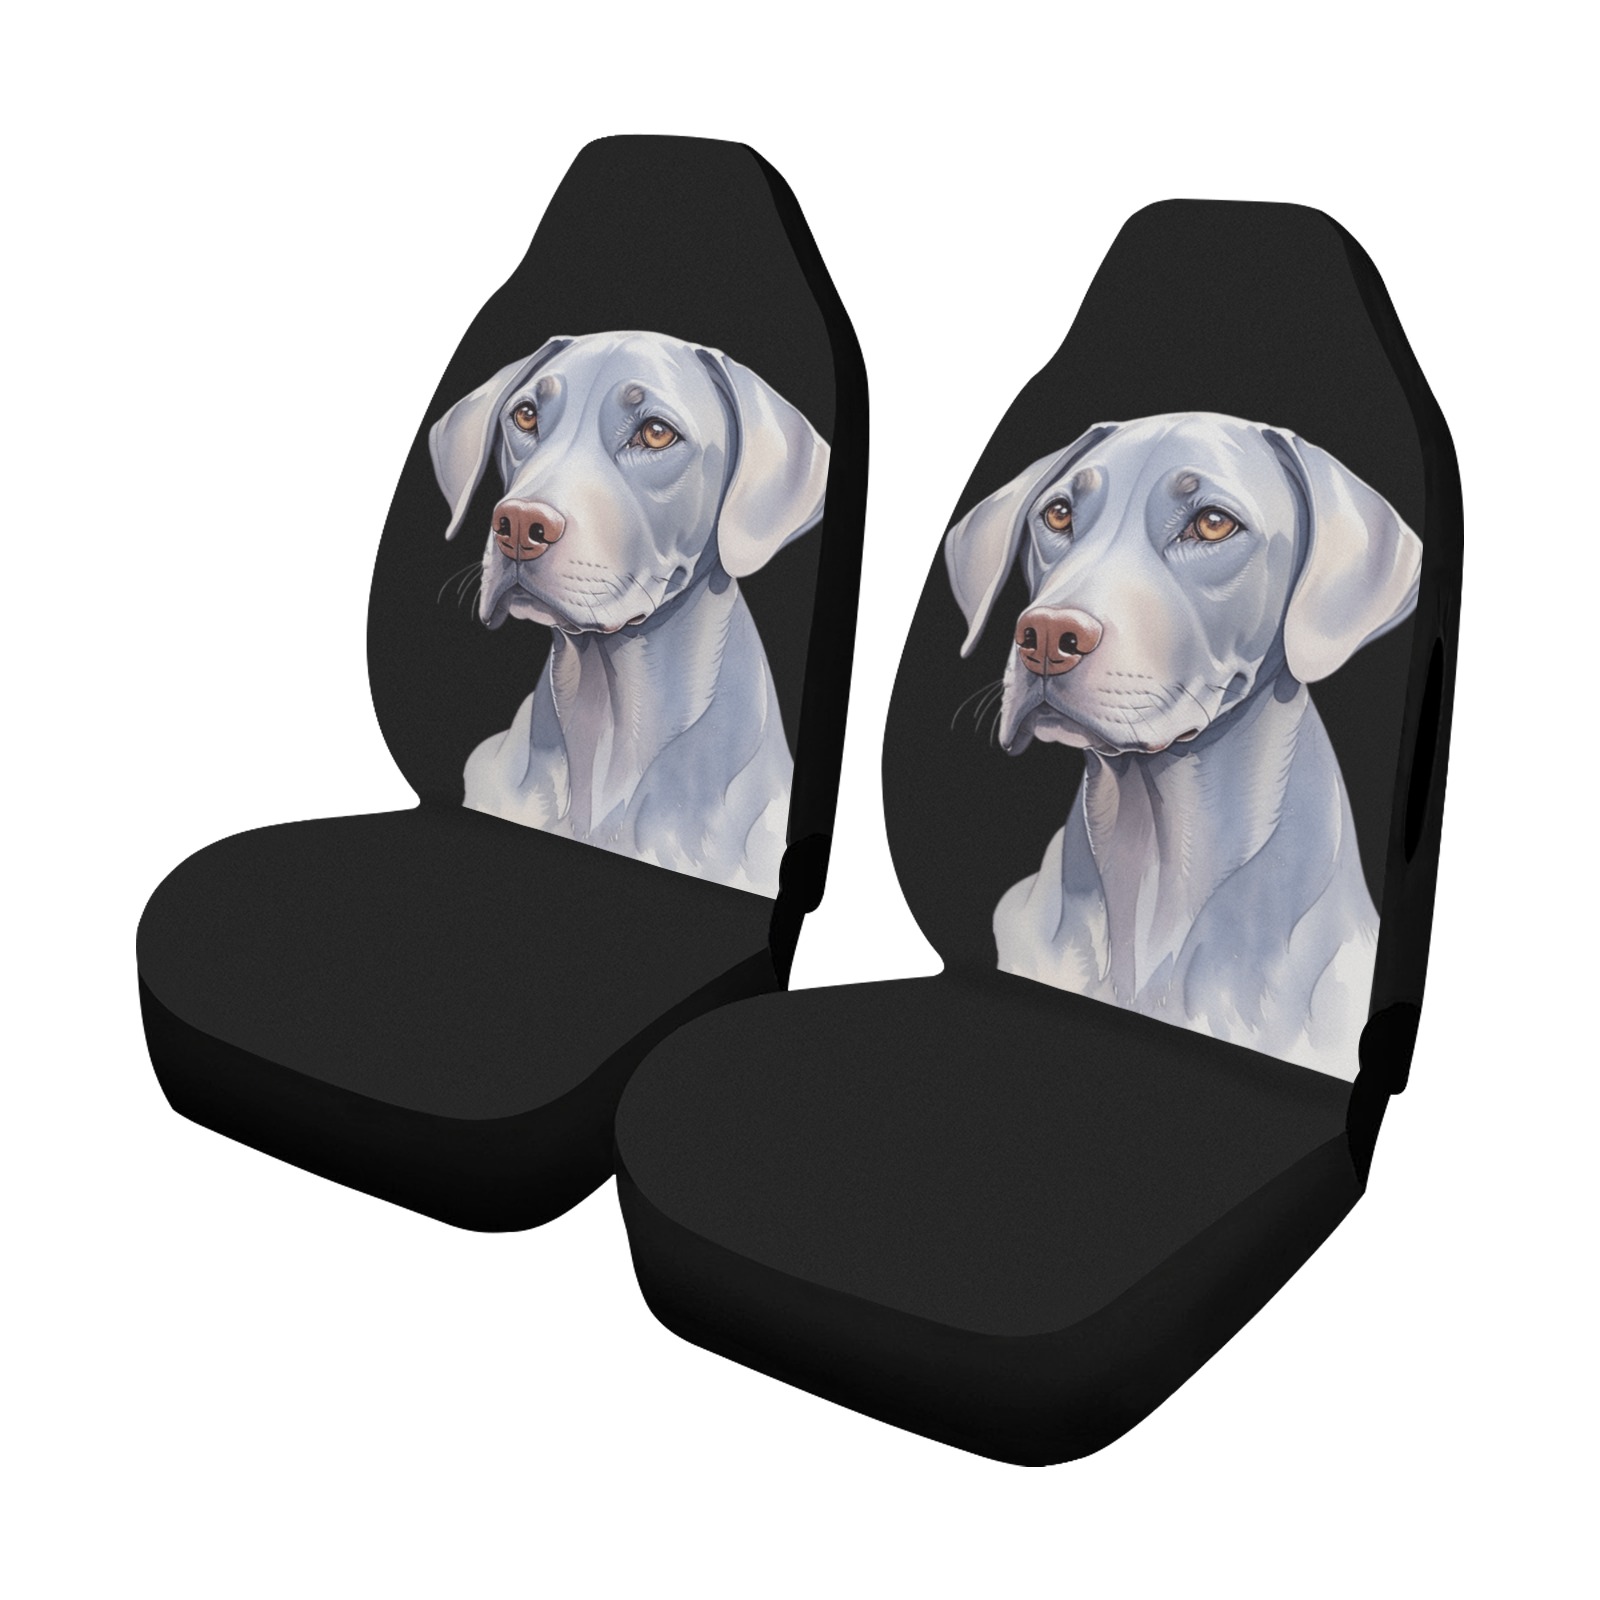 Weimaraner Car Seat Cover Airbag Compatible (Set of 2)